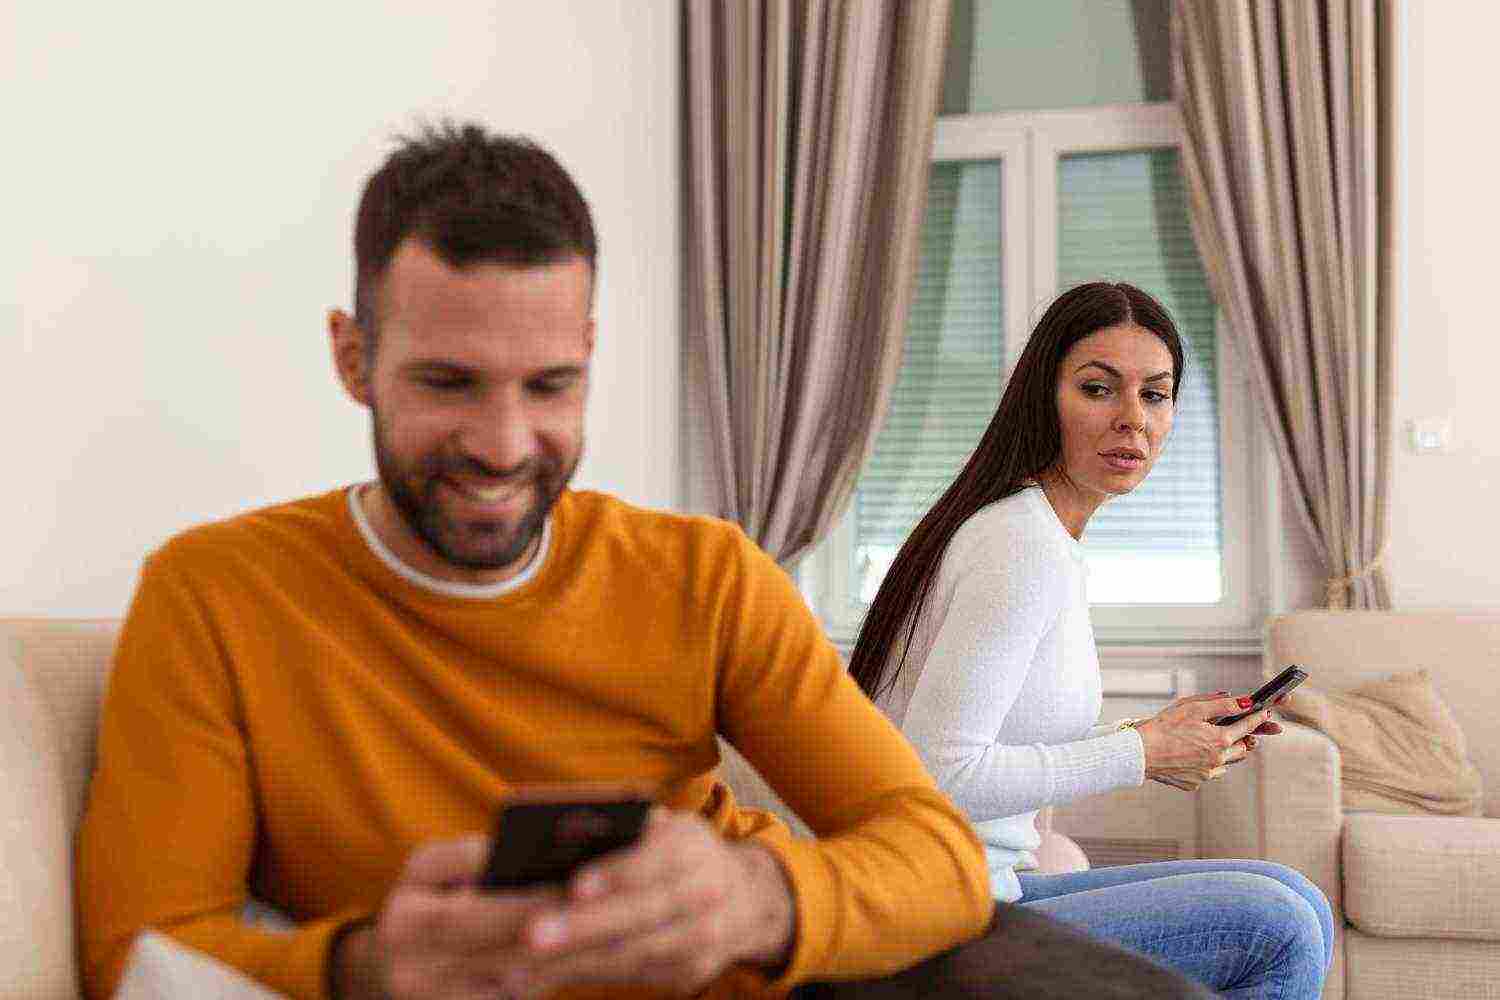 jealous suspicious mad wife arguing with obsessed husband holding phone texting cheating cellphone distrustful girlfriend annoyed with boyfriend mobile addiction distrust social media dependence